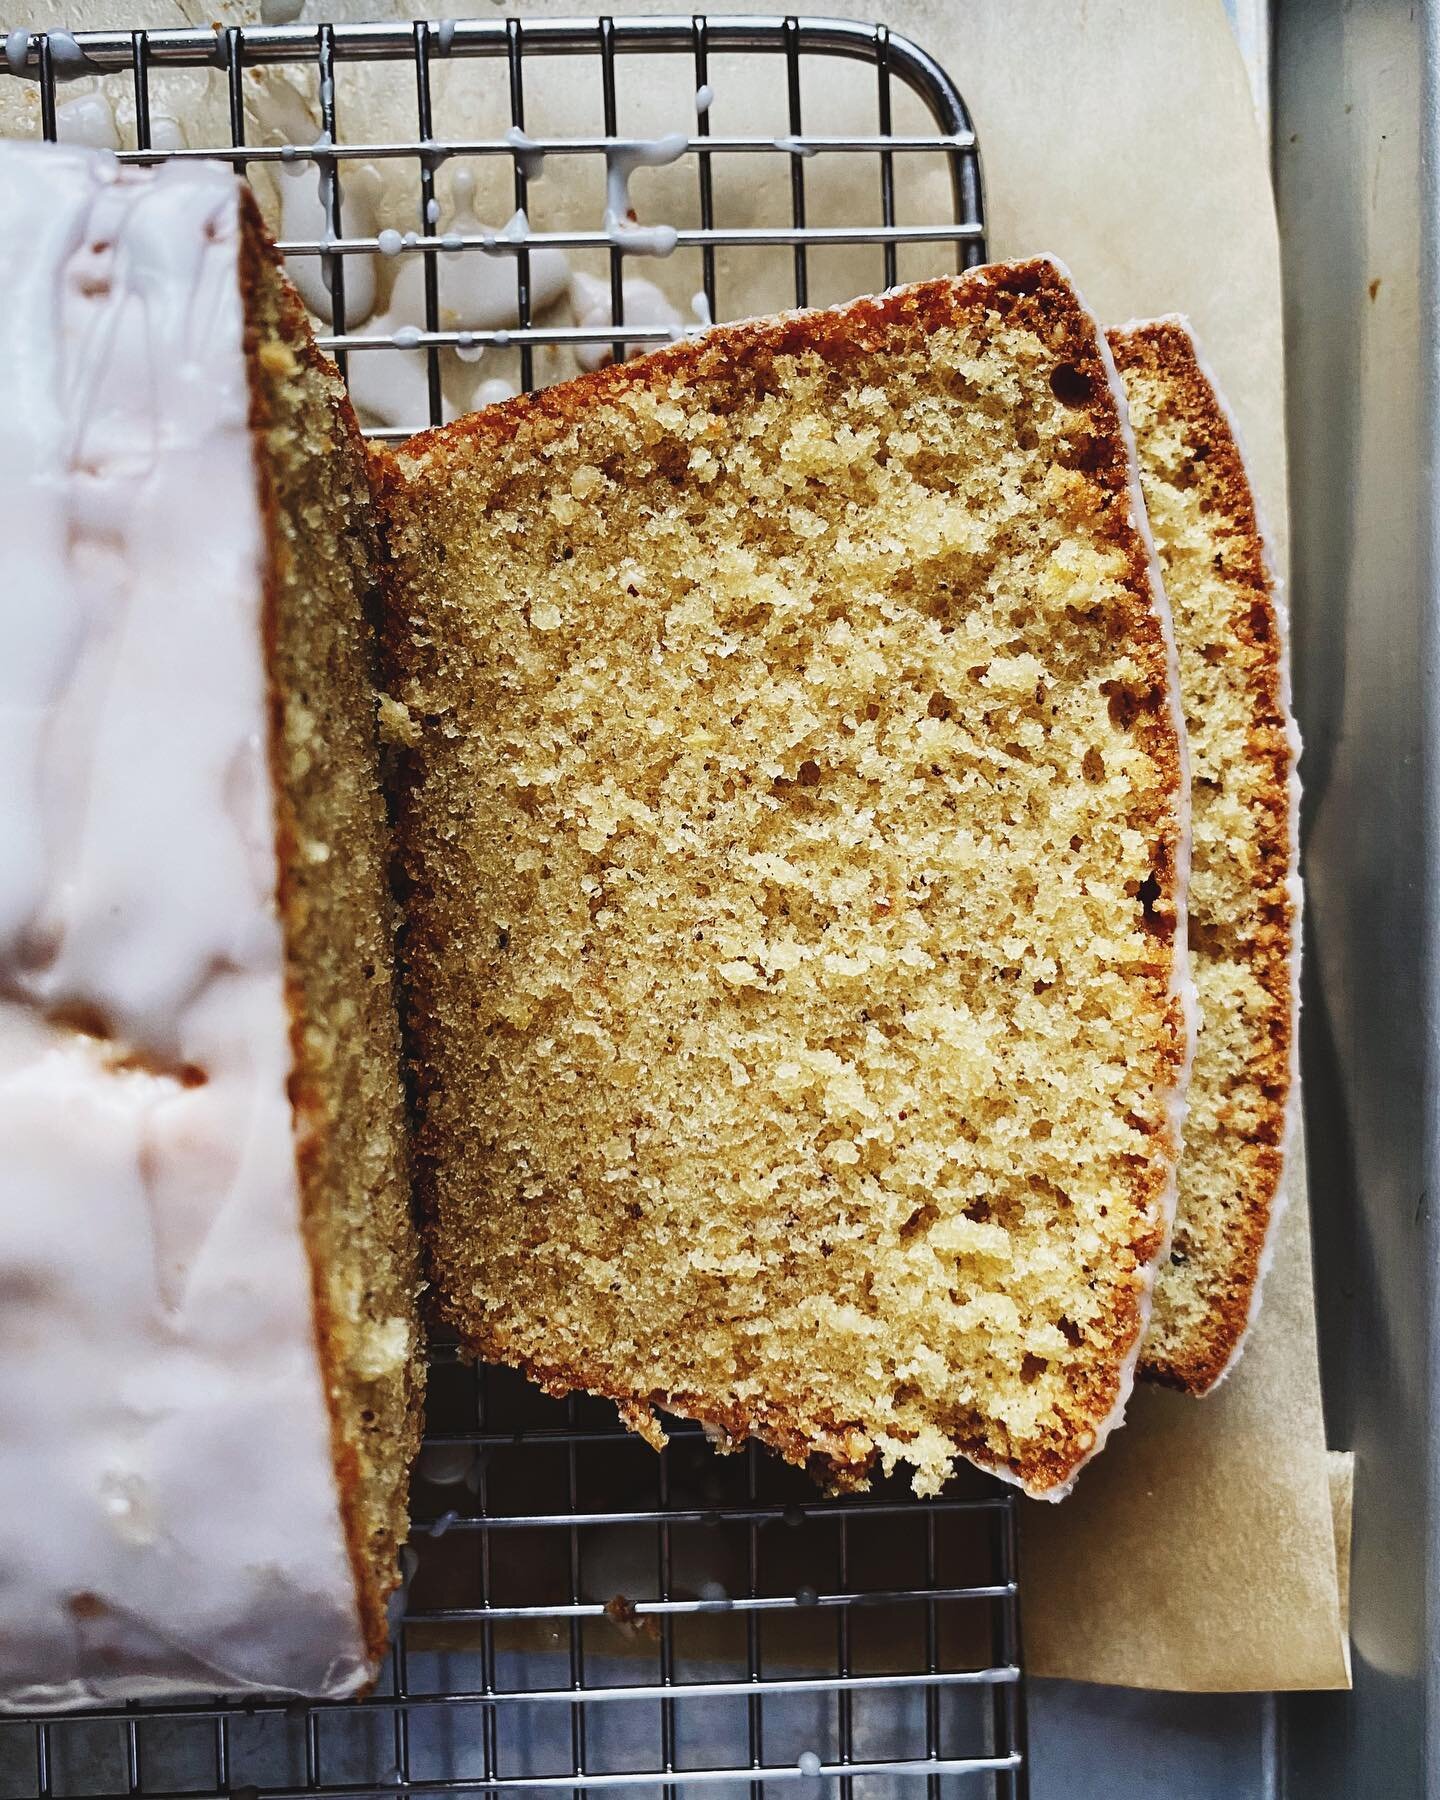 Just a little cake for your Friday. No recipe for this one yet, but there are lots of recipes from Snacking Cakes online if you&rsquo;re looking for some inspiration. Have a cozy weekend everyone ☕️ ✨❤️